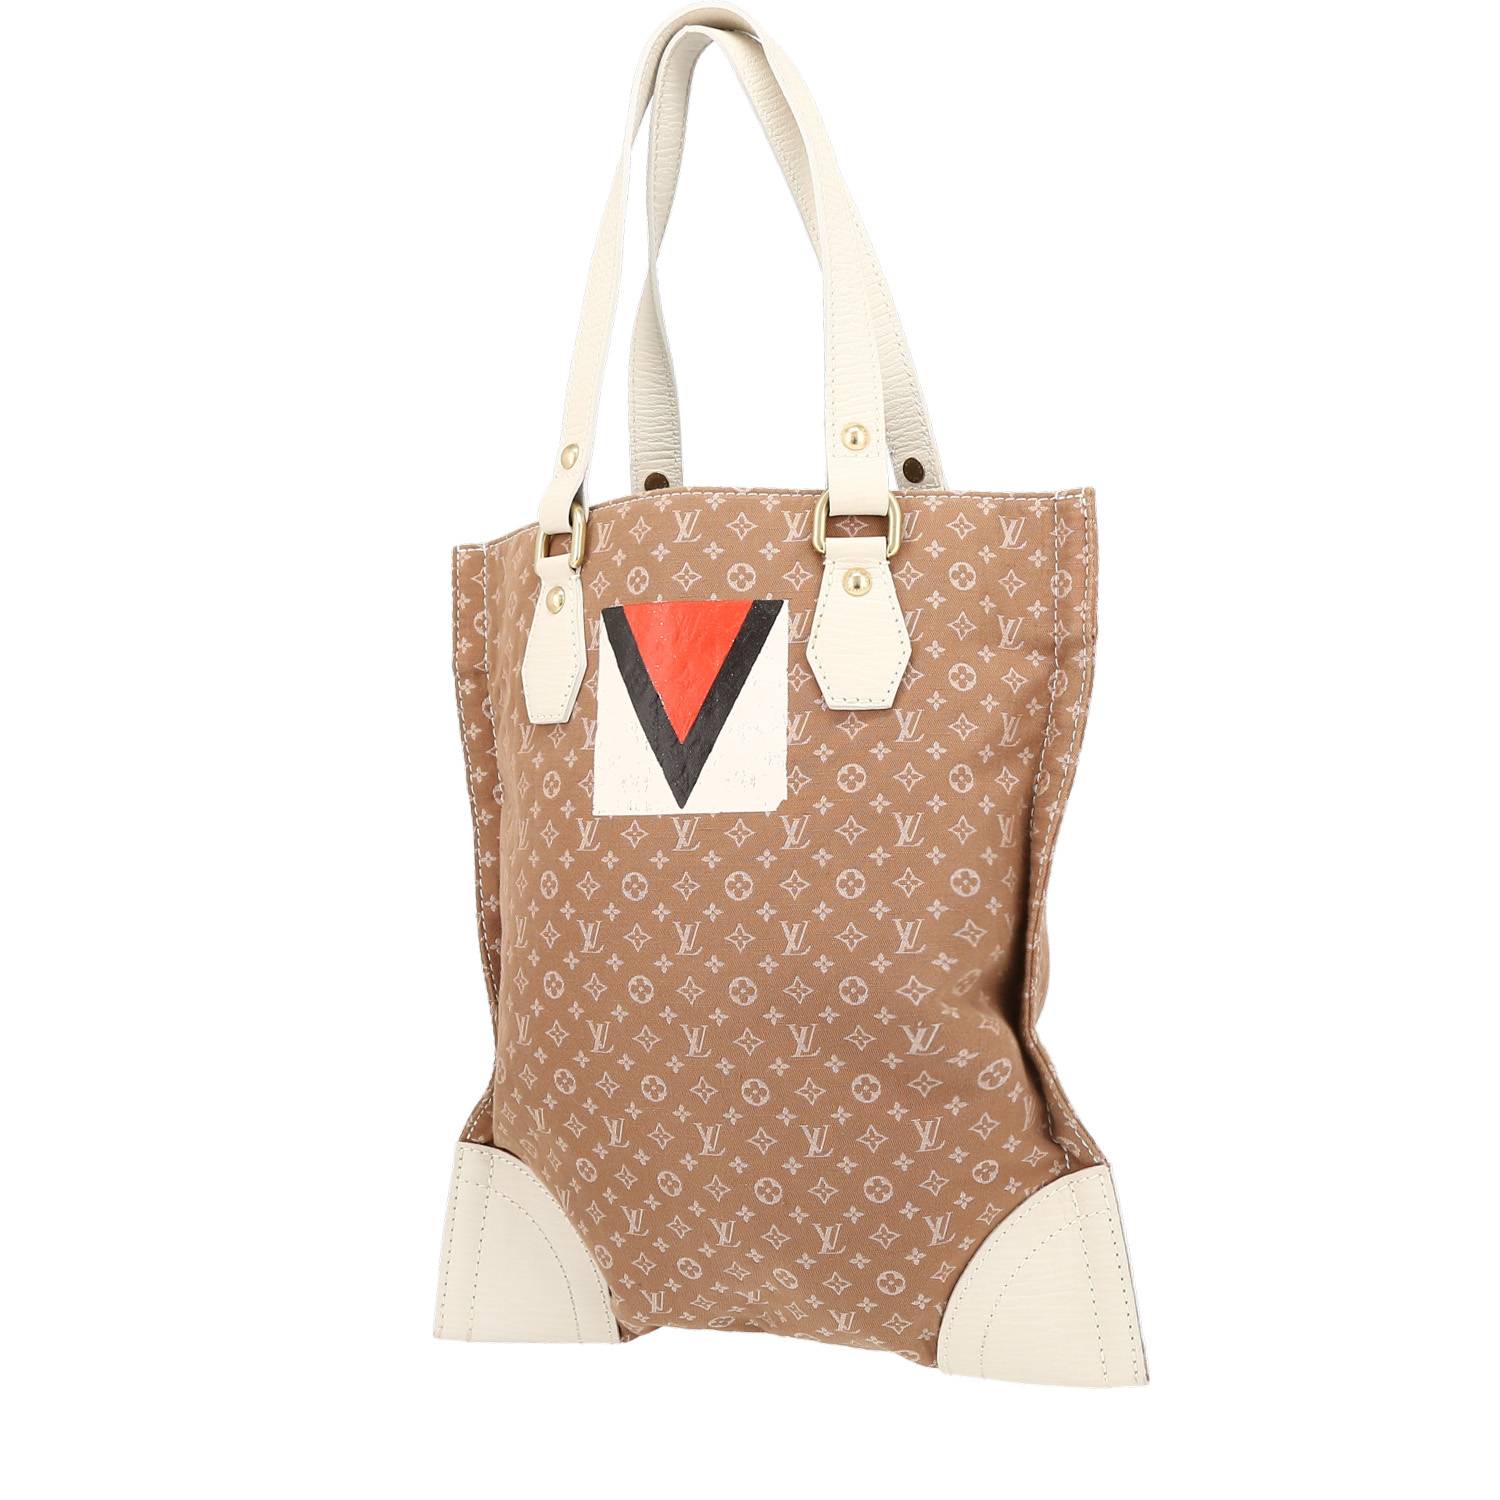 Graphic Print Leather Tote Bag, Cra-wallonieShops